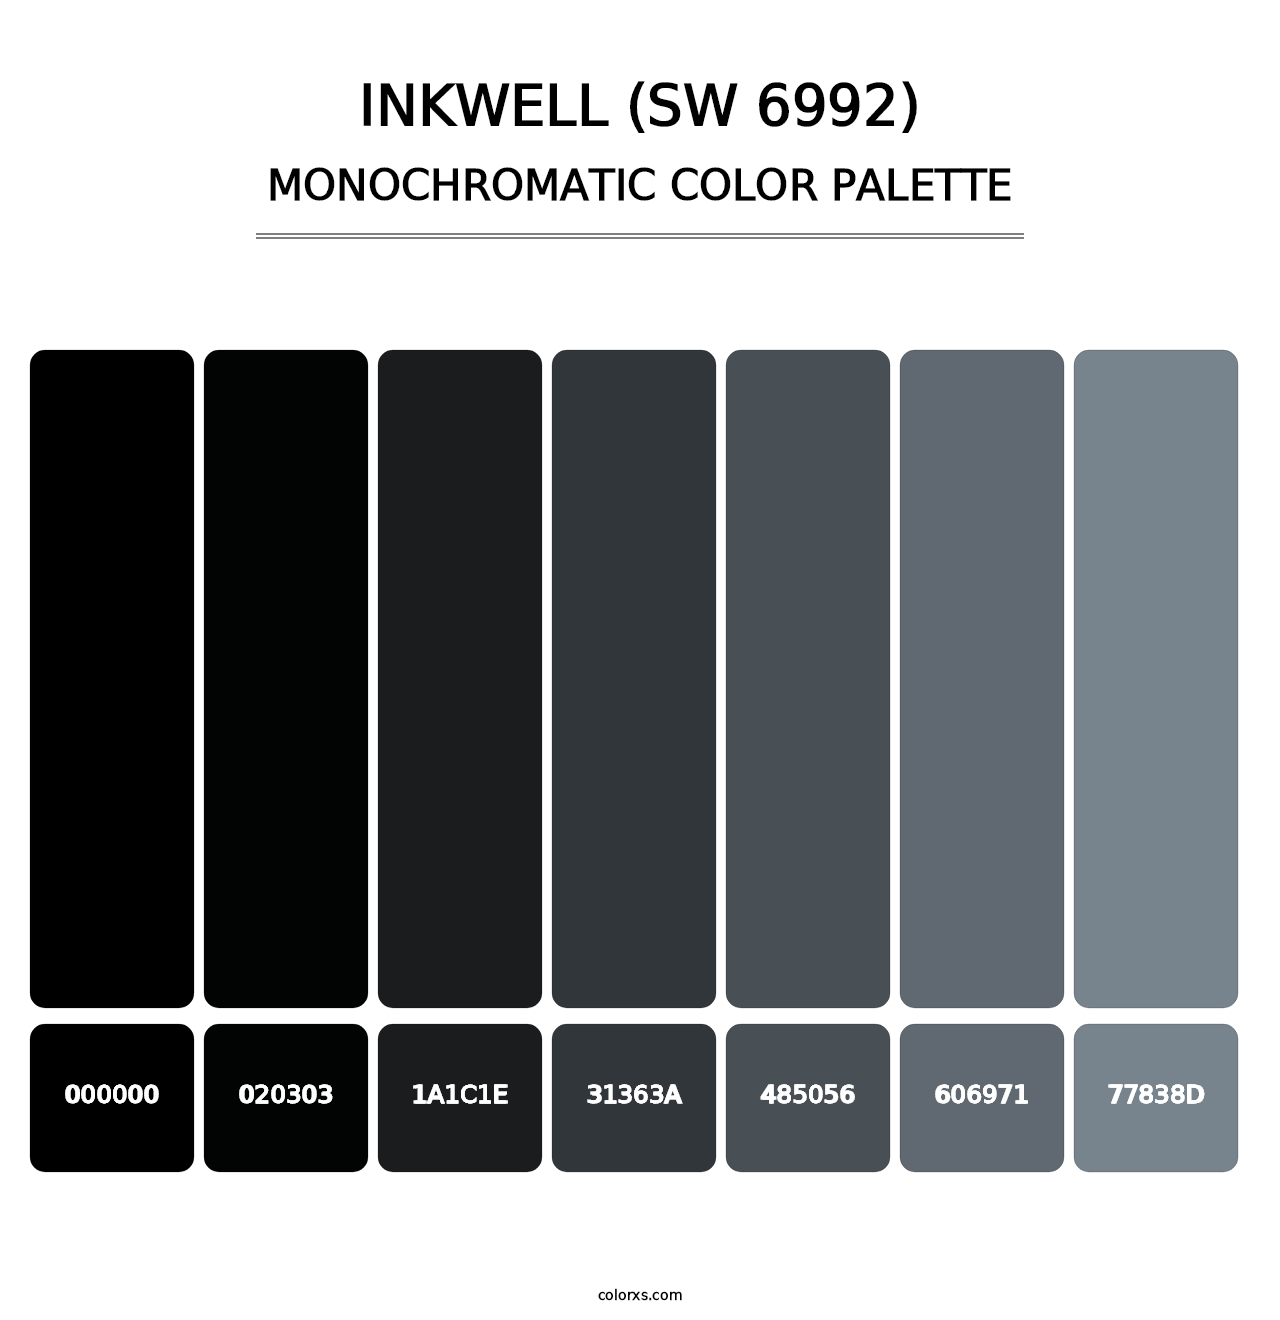 Inkwell (SW 6992) - Monochromatic Color Palette